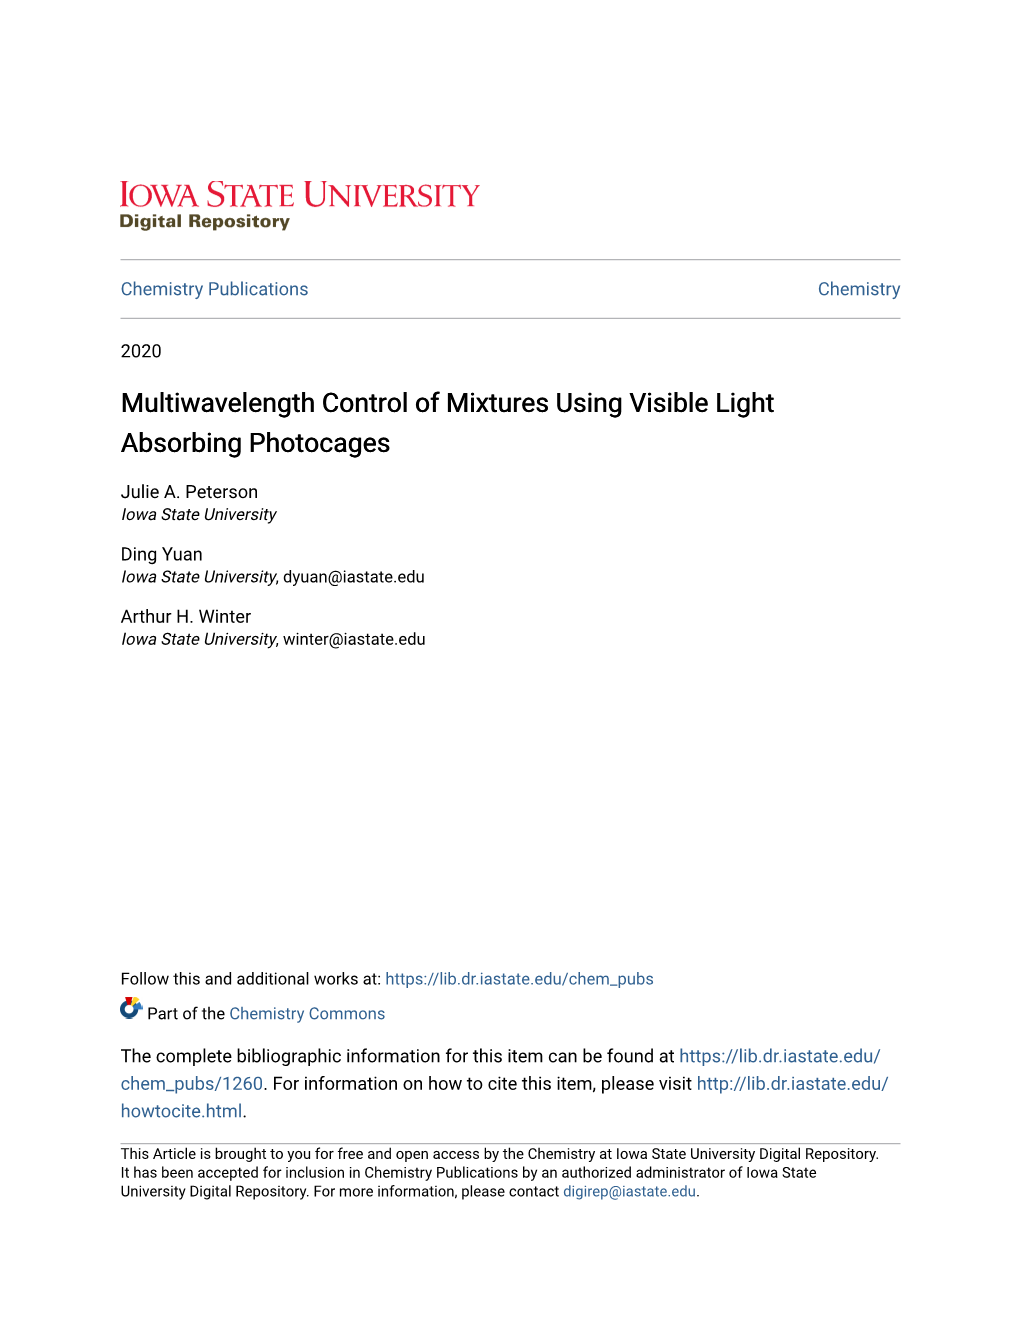 Multiwavelength Control of Mixtures Using Visible Light Absorbing Photocages